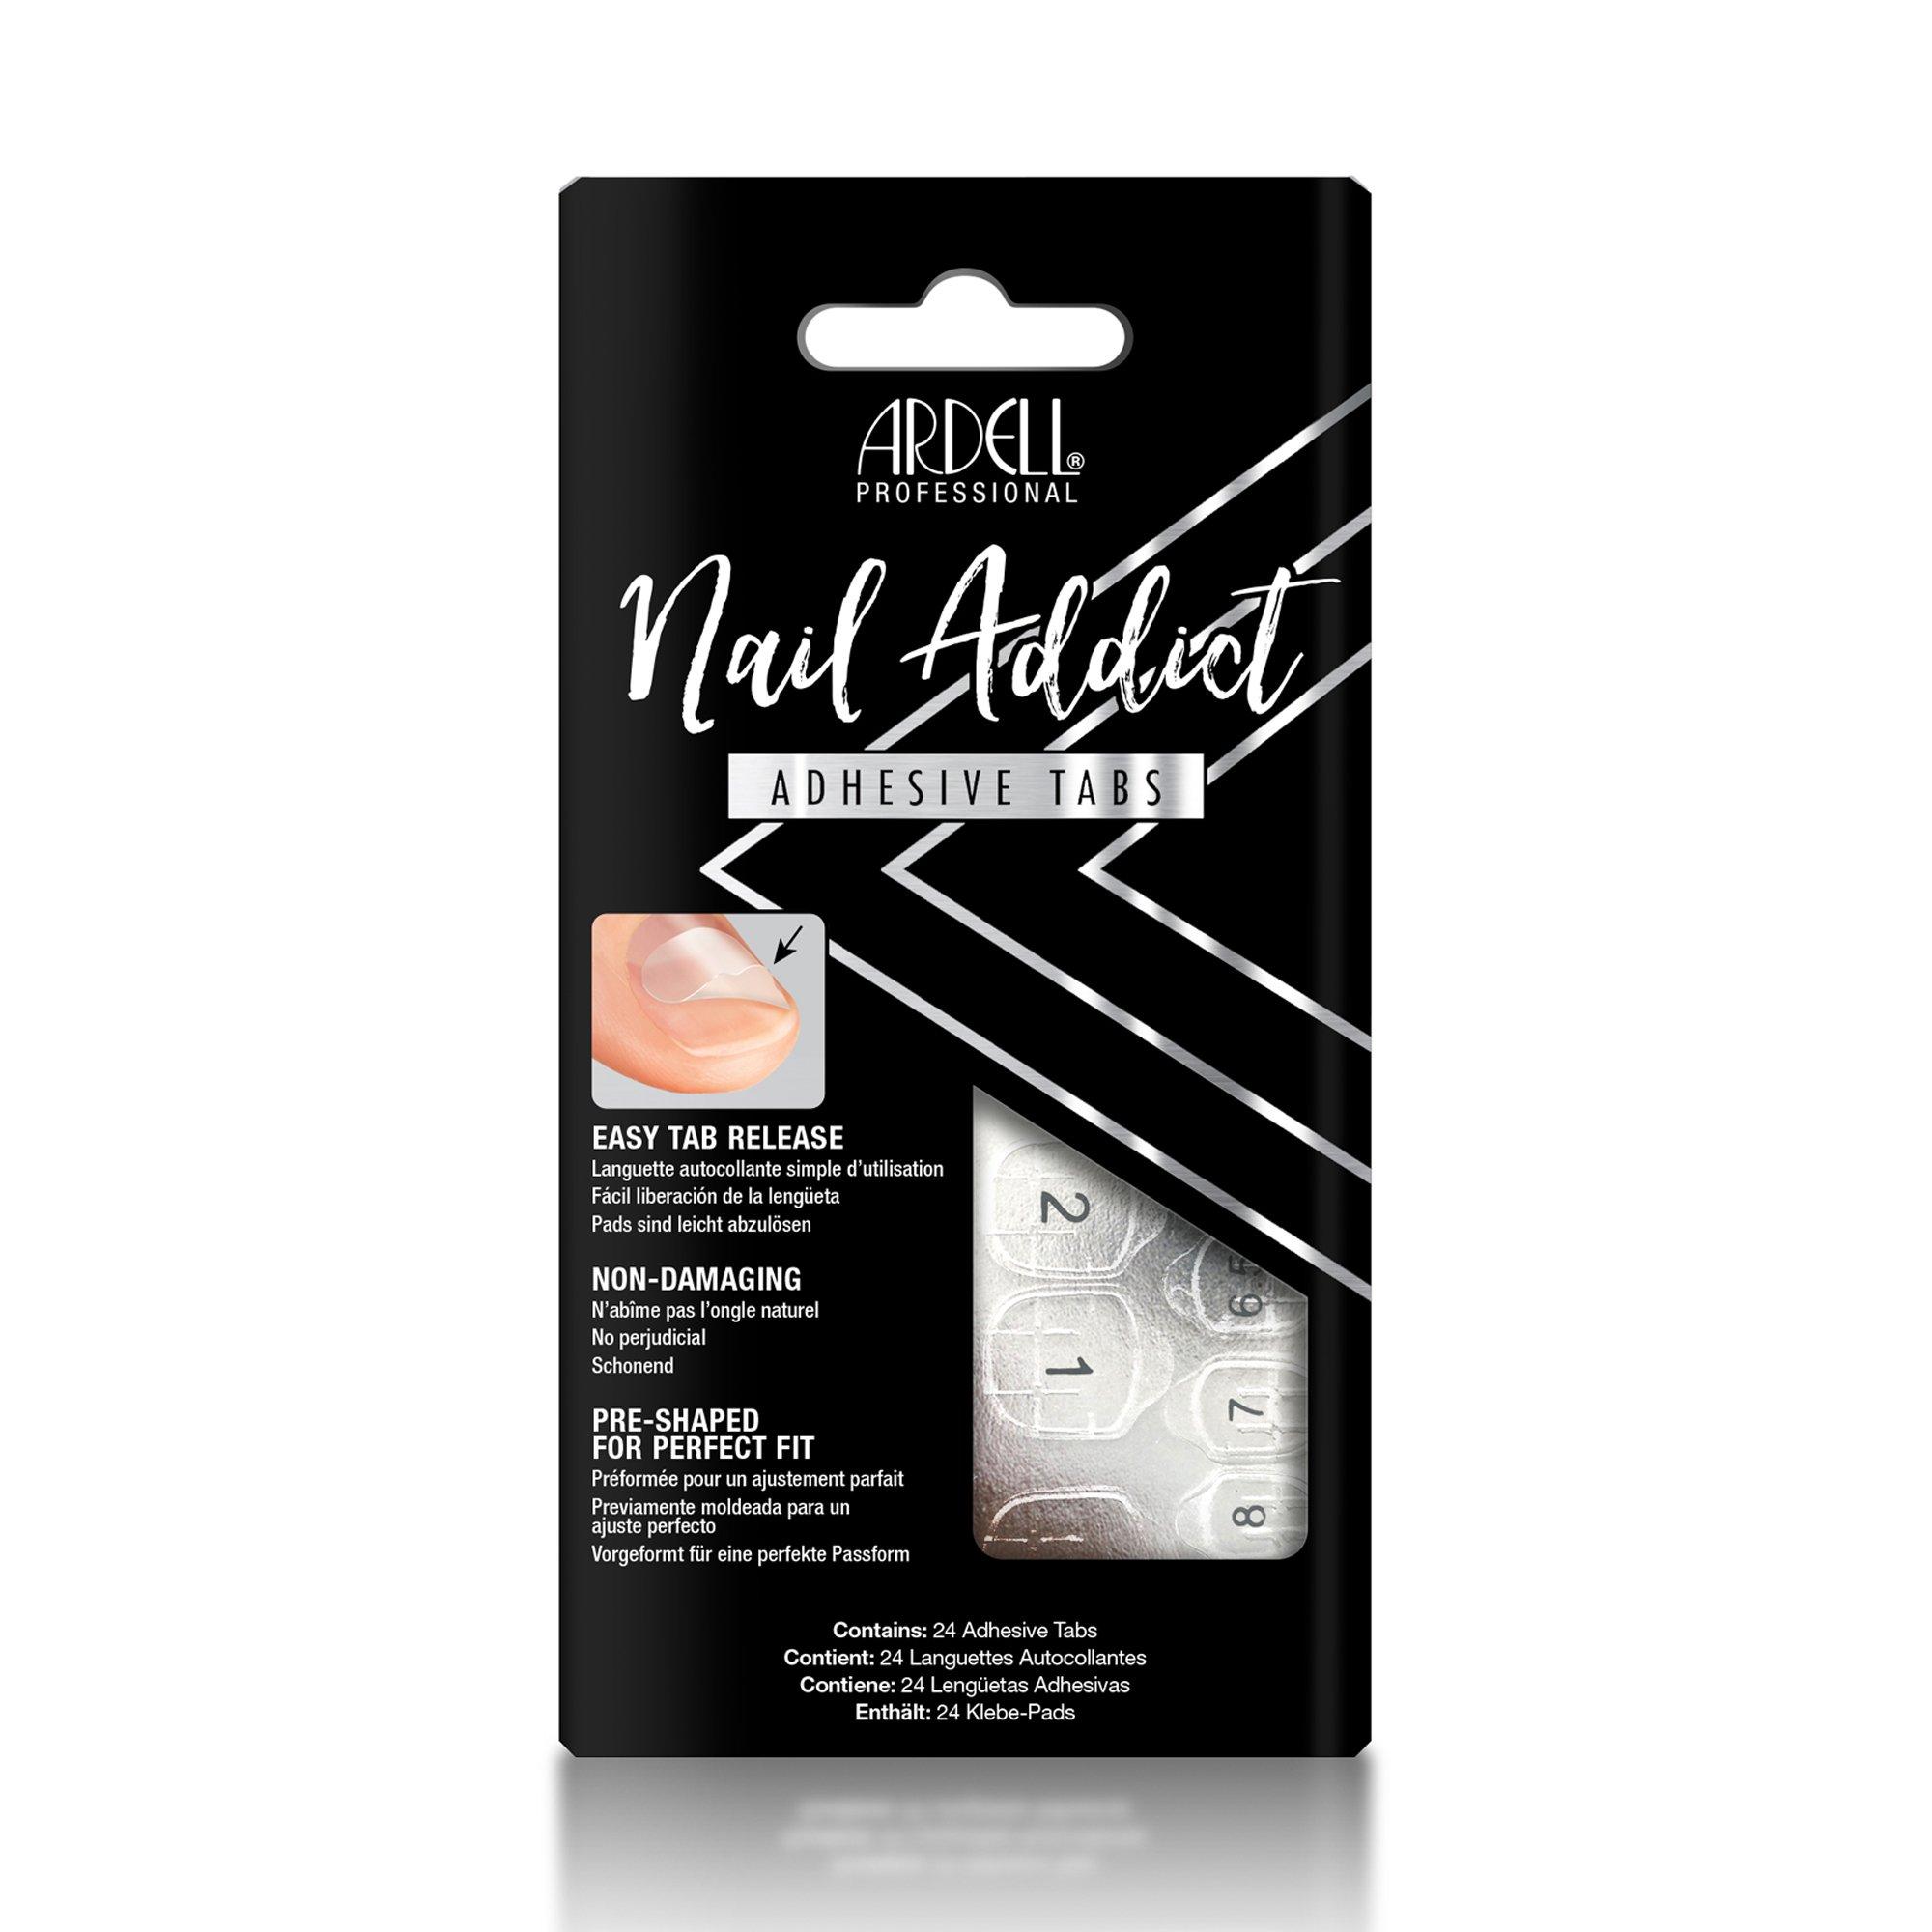 ARDELL Nail Addict Nail Addict Adhesive Tabs, Feuilles Adhésives Pour Ongles Artificiels 